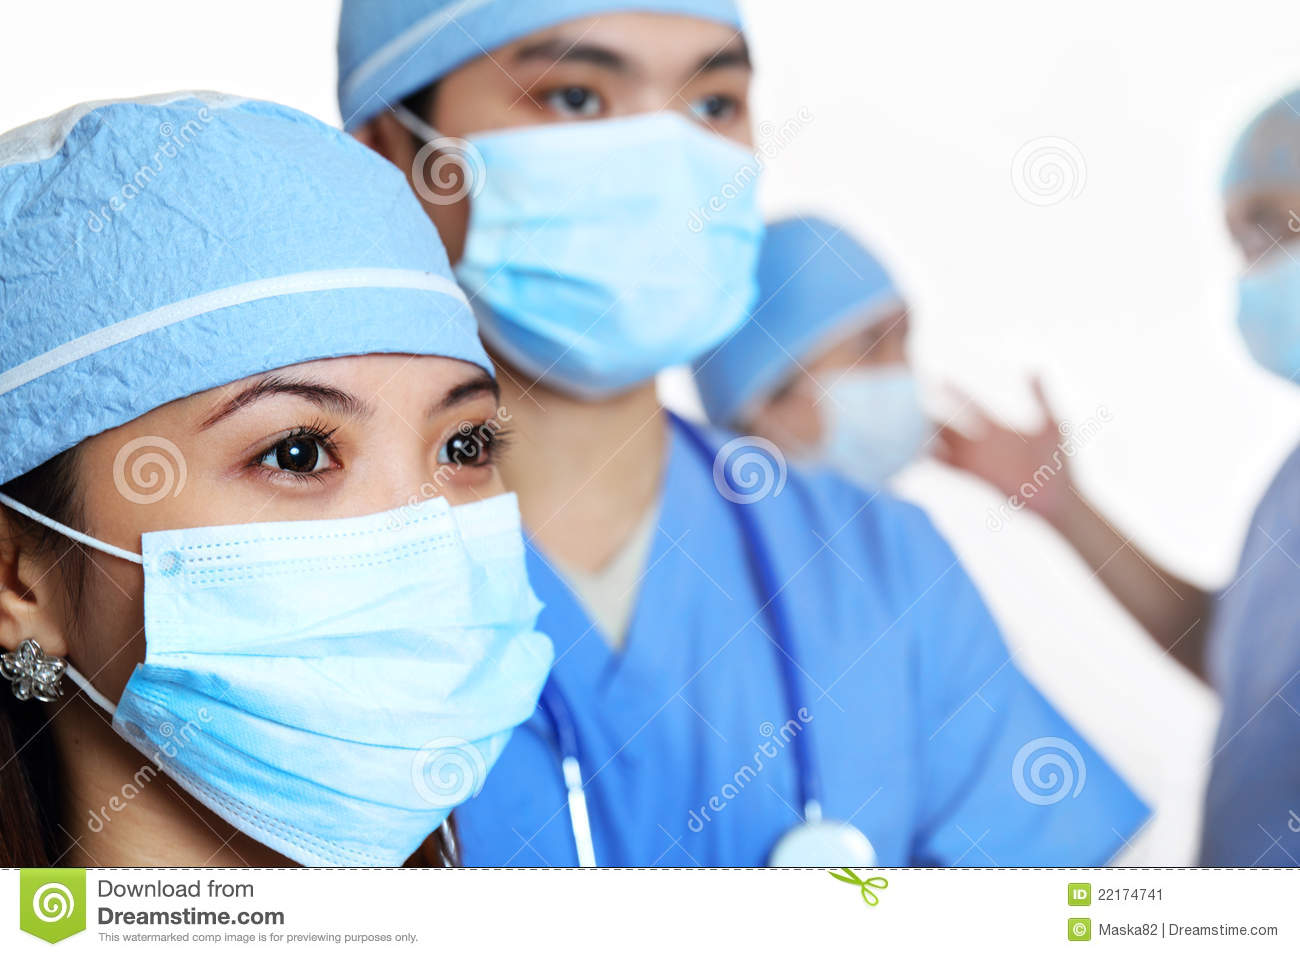 Health Workers Stock Image   Image  22174741